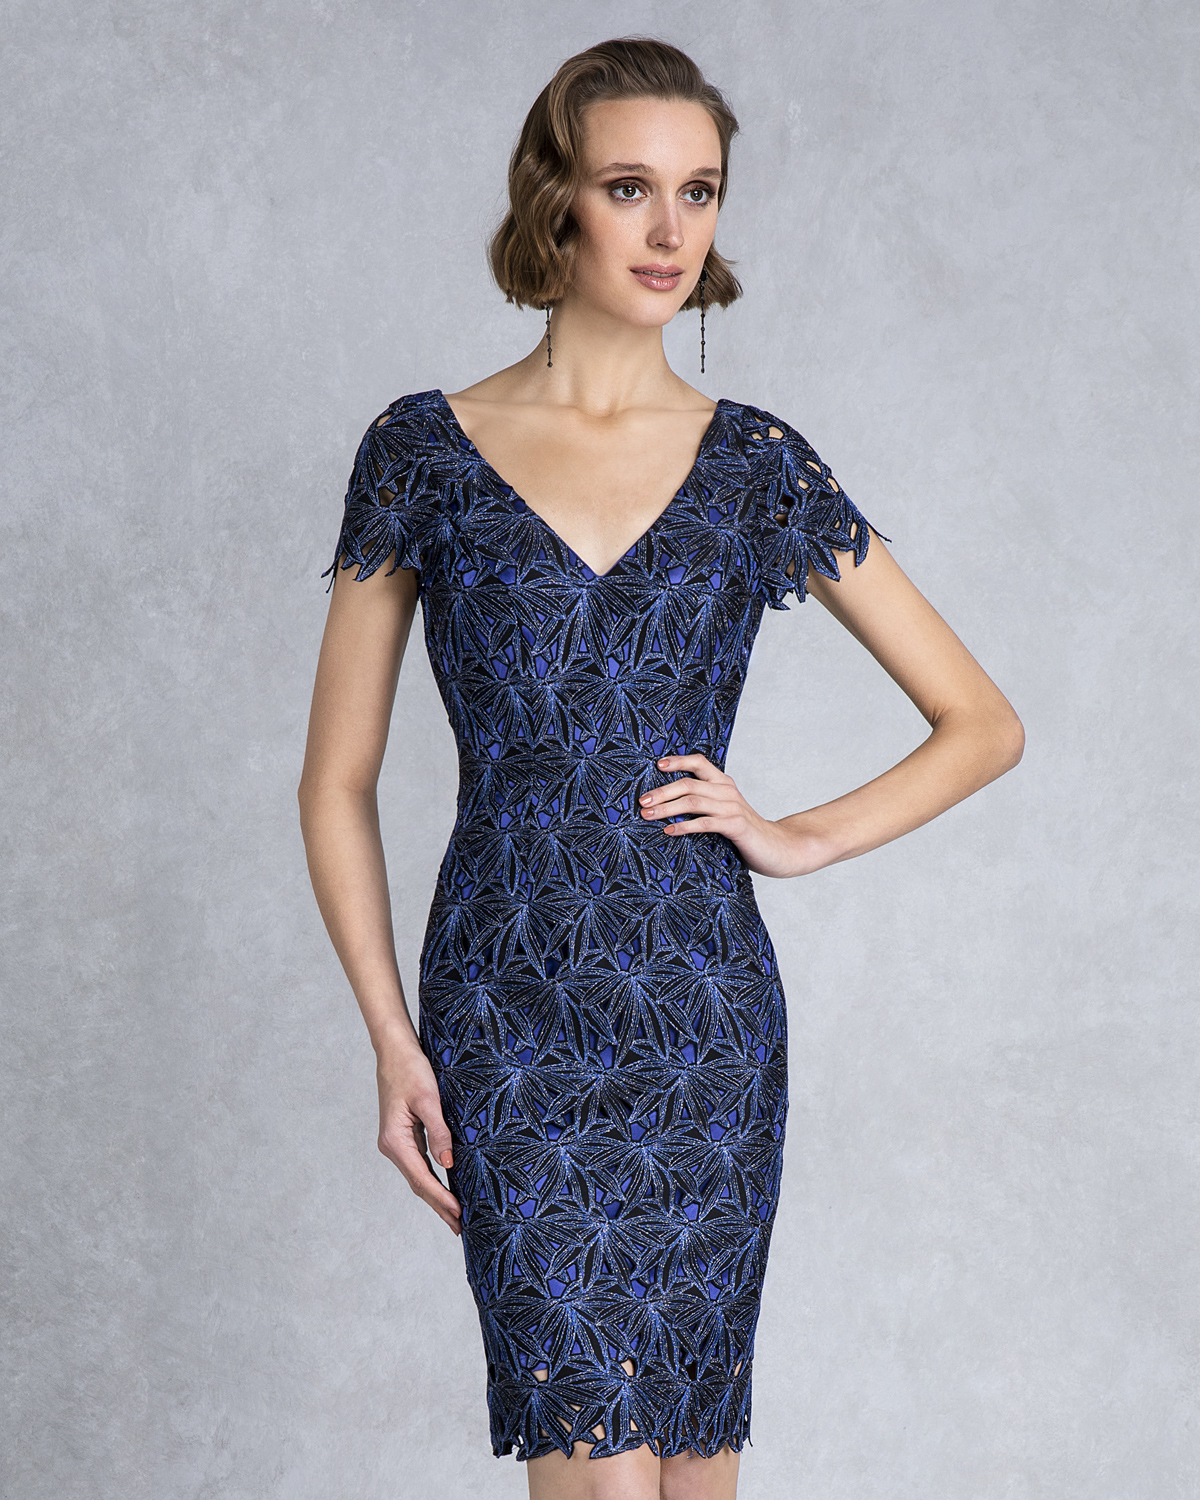 Classic Dresses / Mother of the bride short lace dress